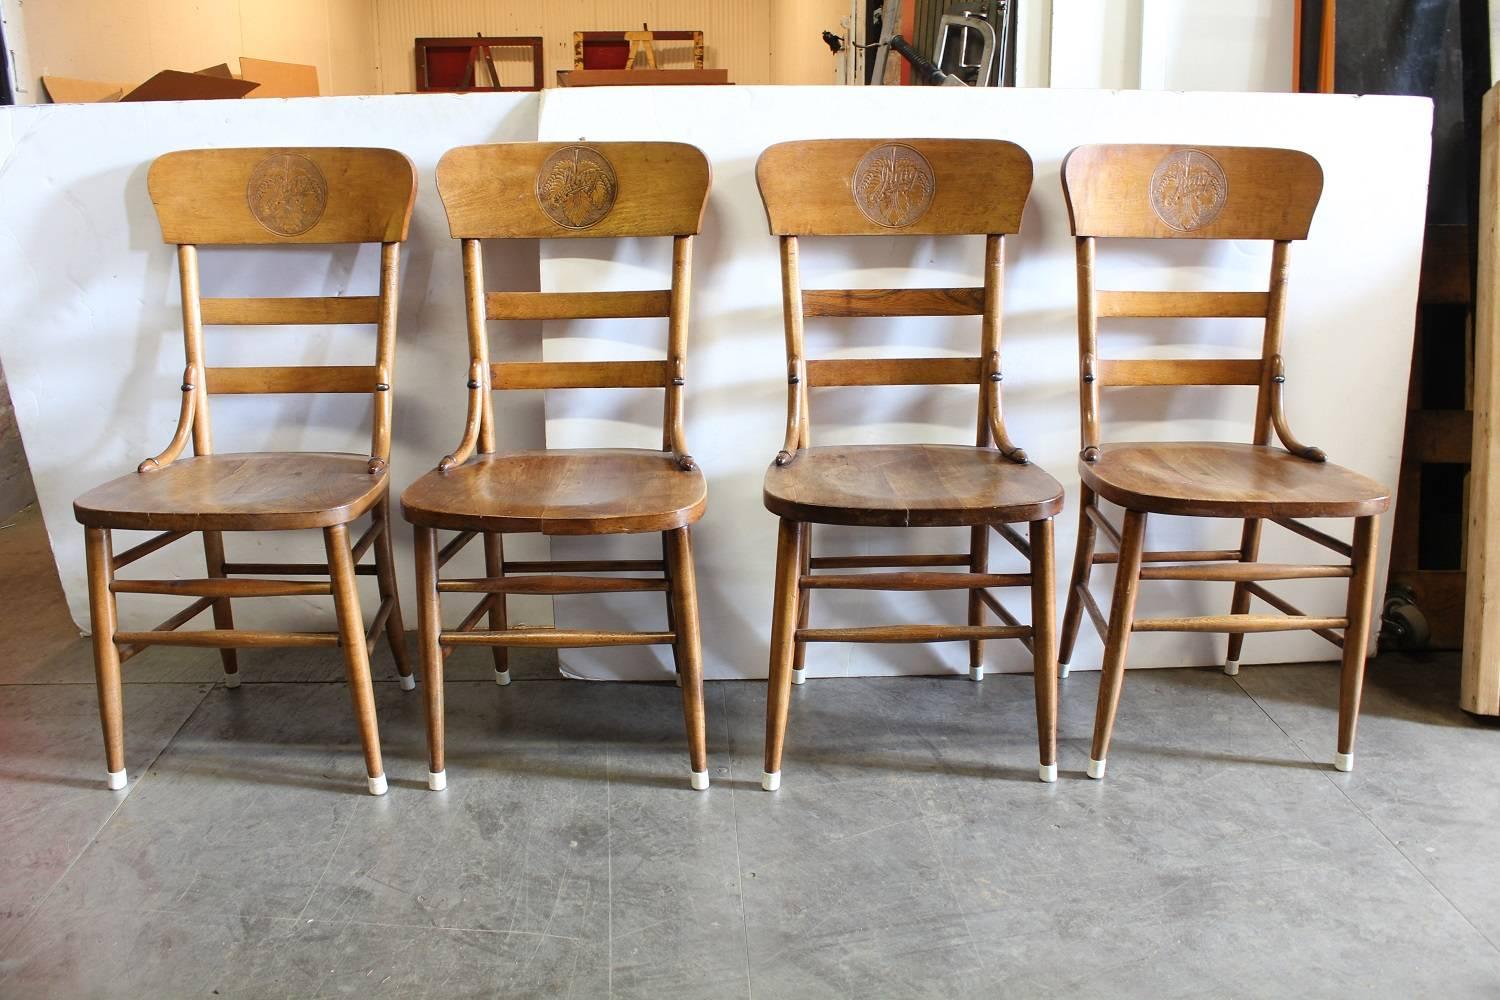 Rare 1900s Jung Brewery tavern chairs. In 1896, Philipp Jung purchased the Obermann Brewing Company at fifth and cherry streets in Milwaukee,[3] where he established The Jung Brewing Company. This firm grew and outlived its founder, finally closing